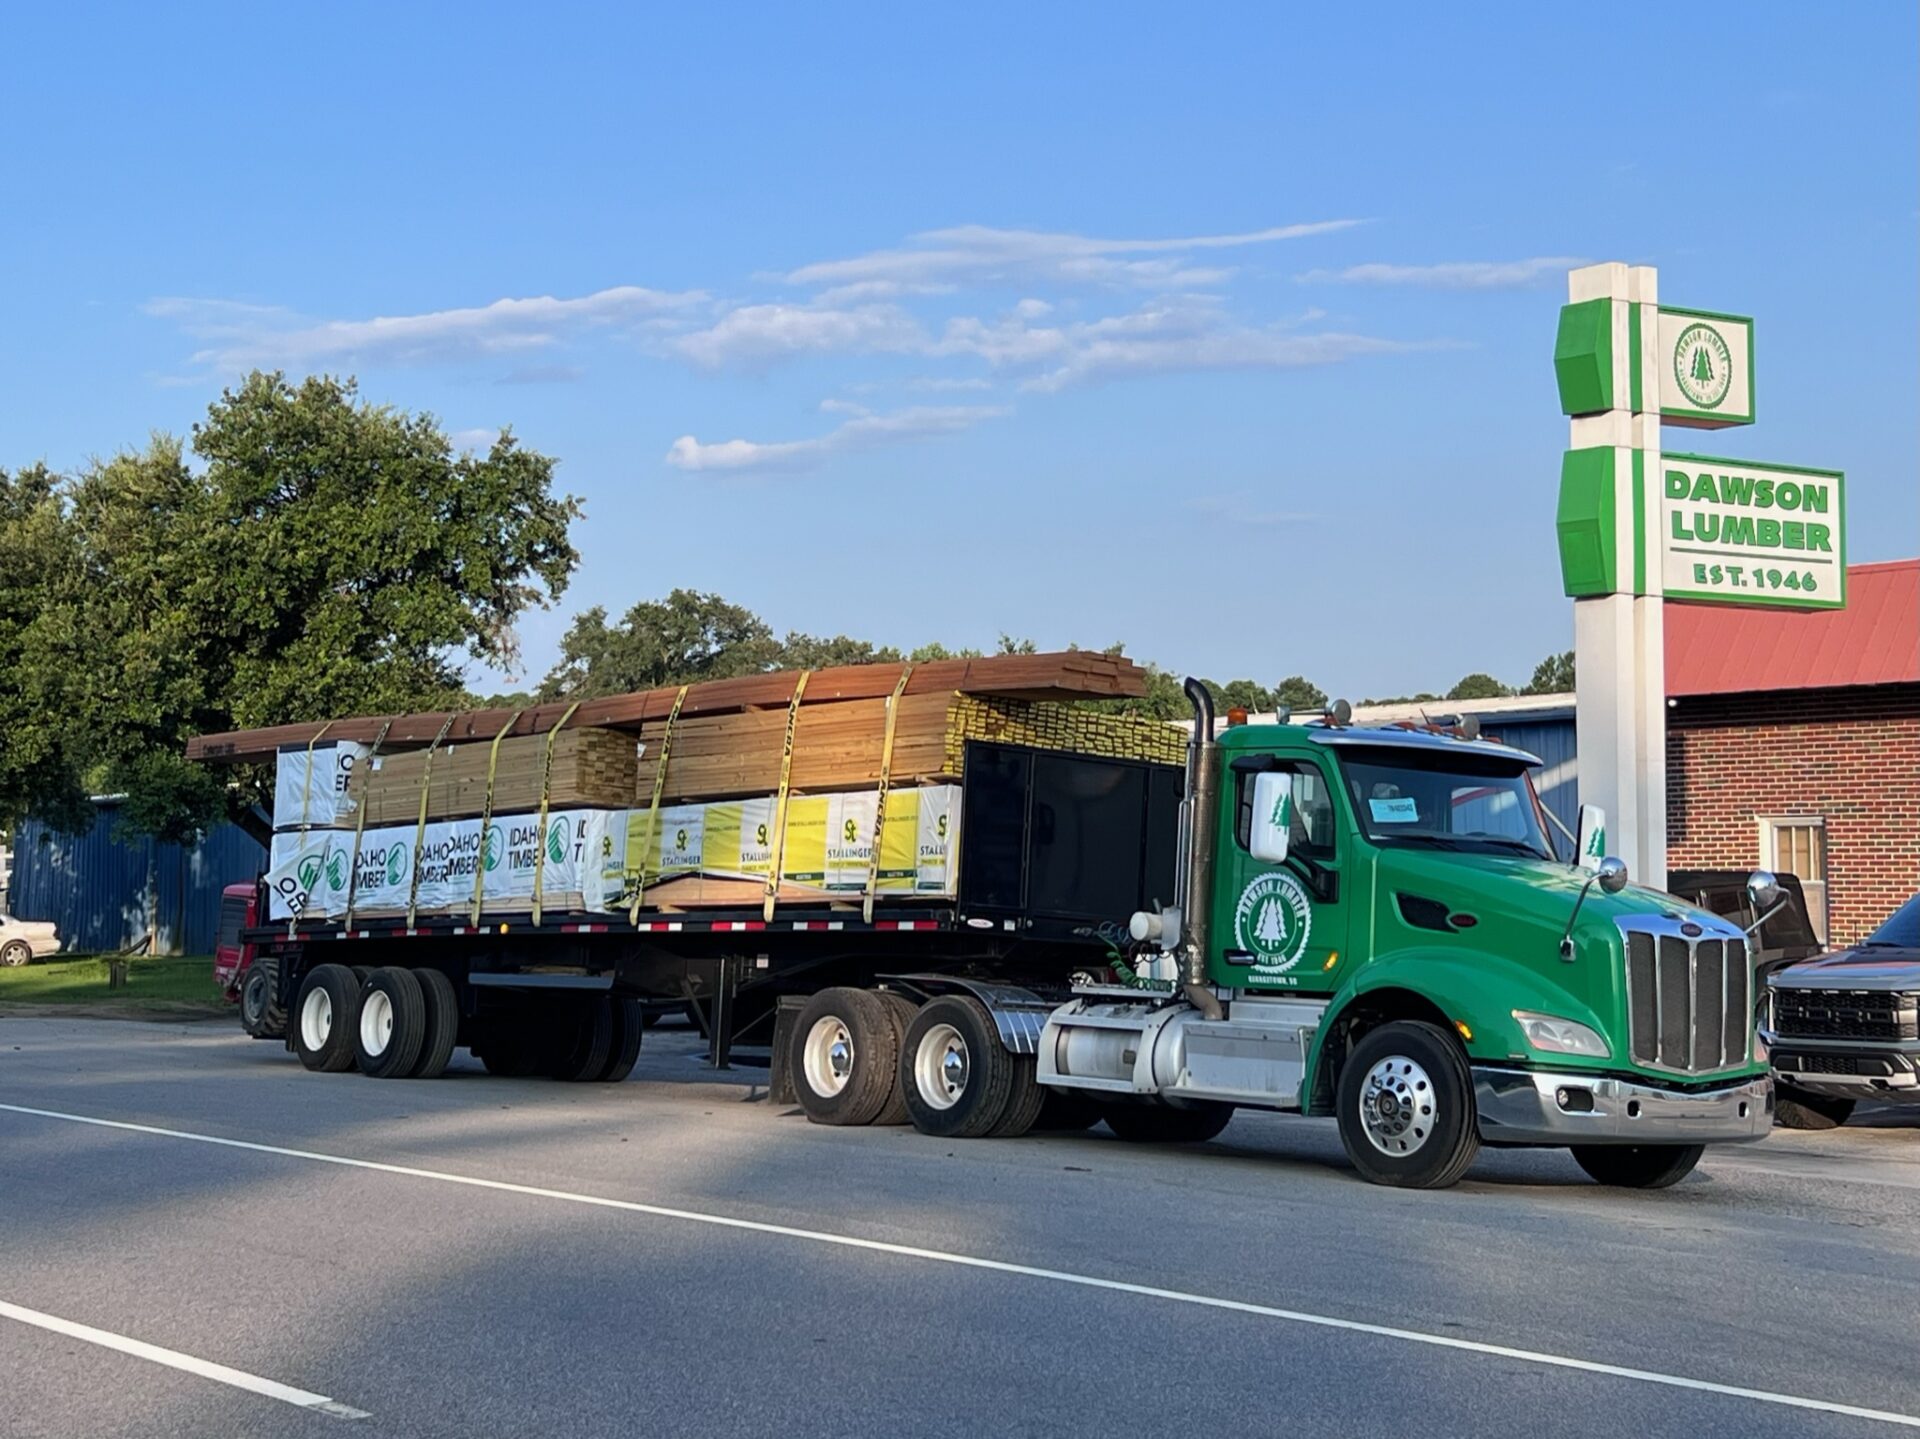 A green semi truck with a trailer on the road.